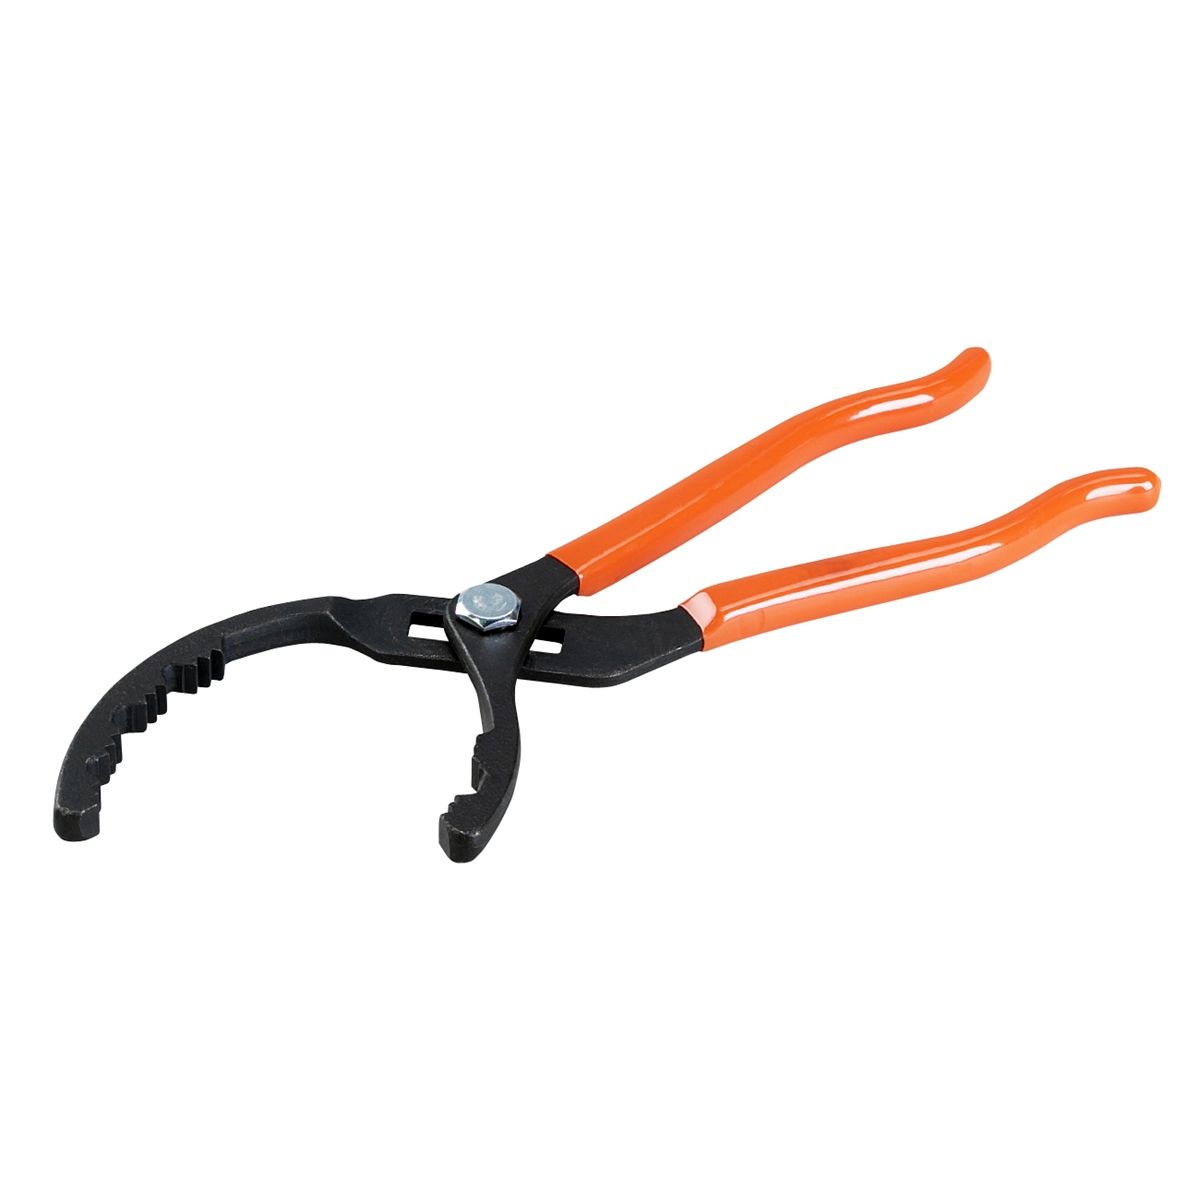 Small Adjustable Oil Filter Pliers 2-1/4" - 5"...